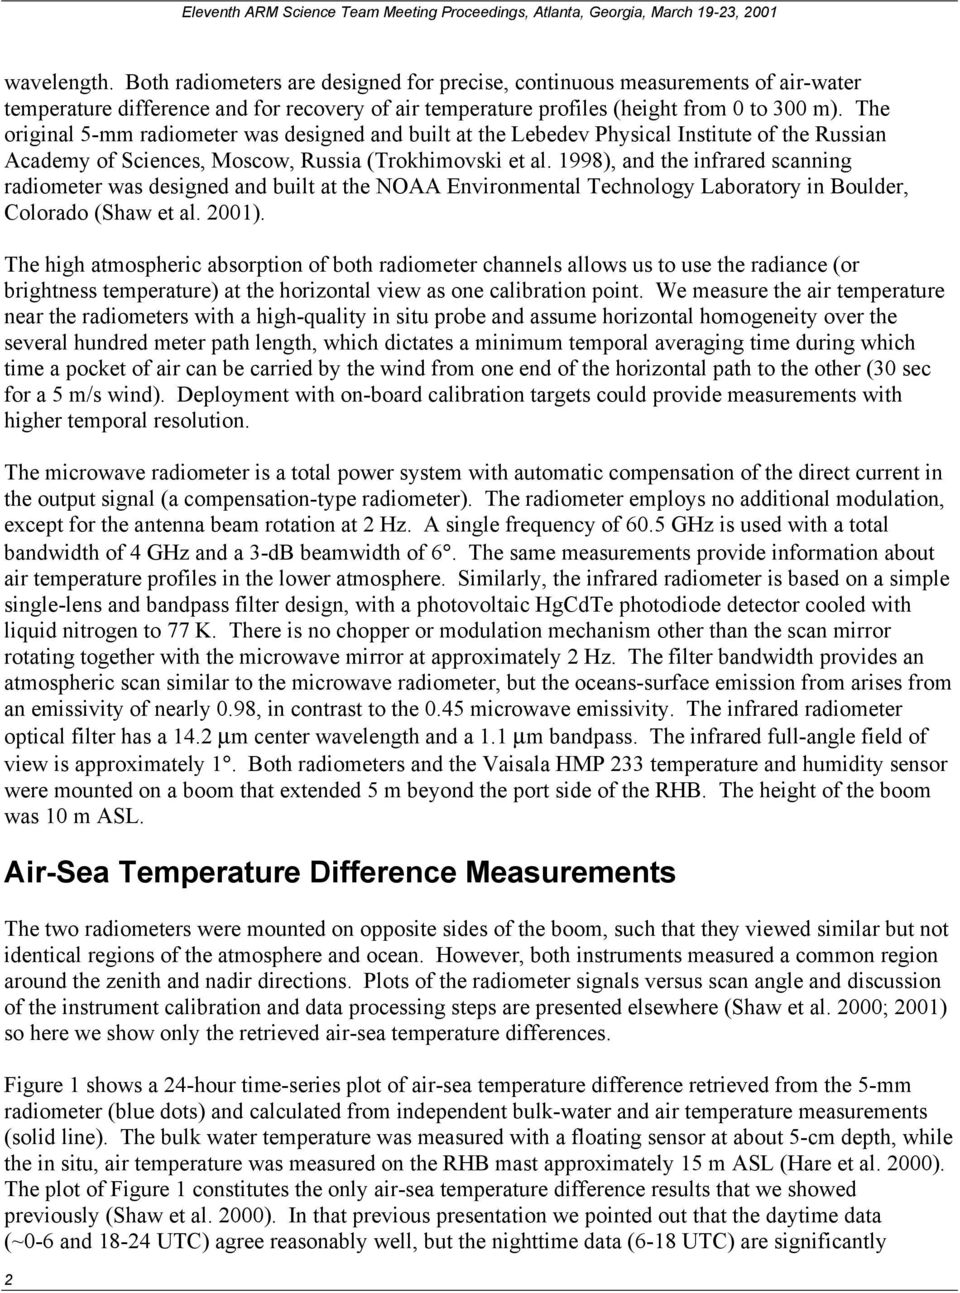 1998), and the infrared scanning radiometer was designed and built at the NOAA Environmental Technology Laboratory in Boulder, Colorado (Shaw et al. 2001).